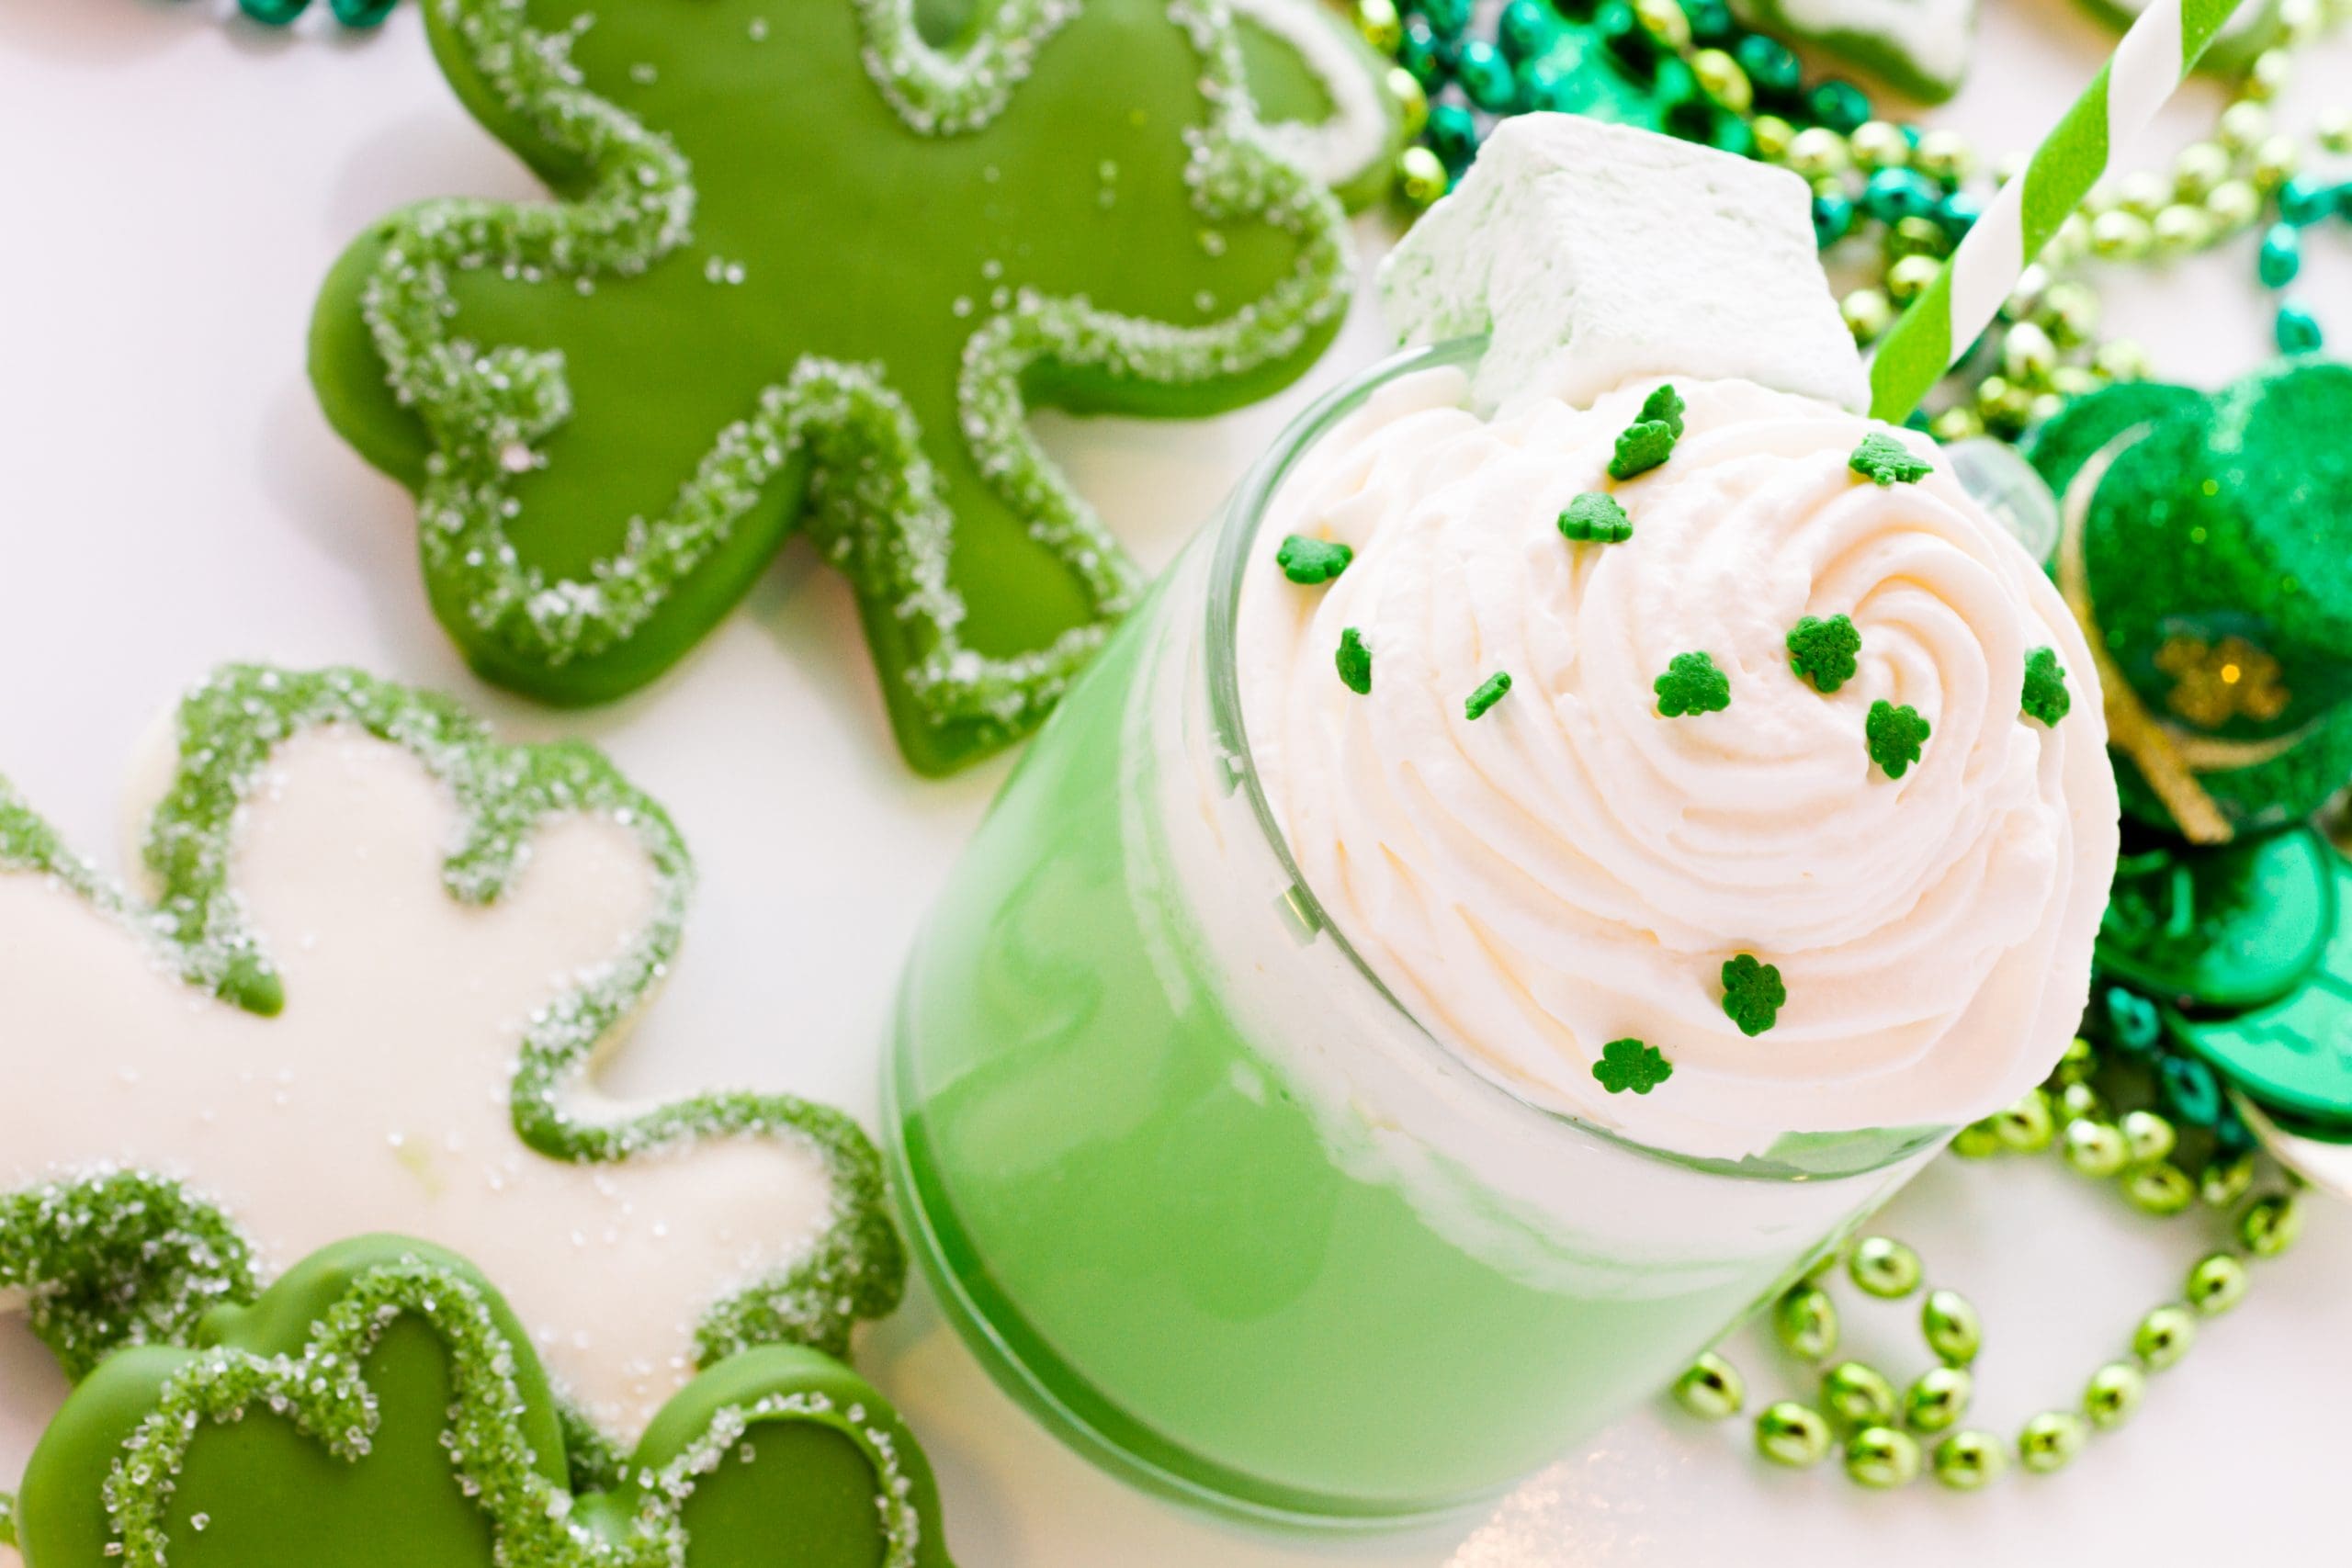 St. Patrick's Day recipes to make at home including clover cookies and mint shake on table